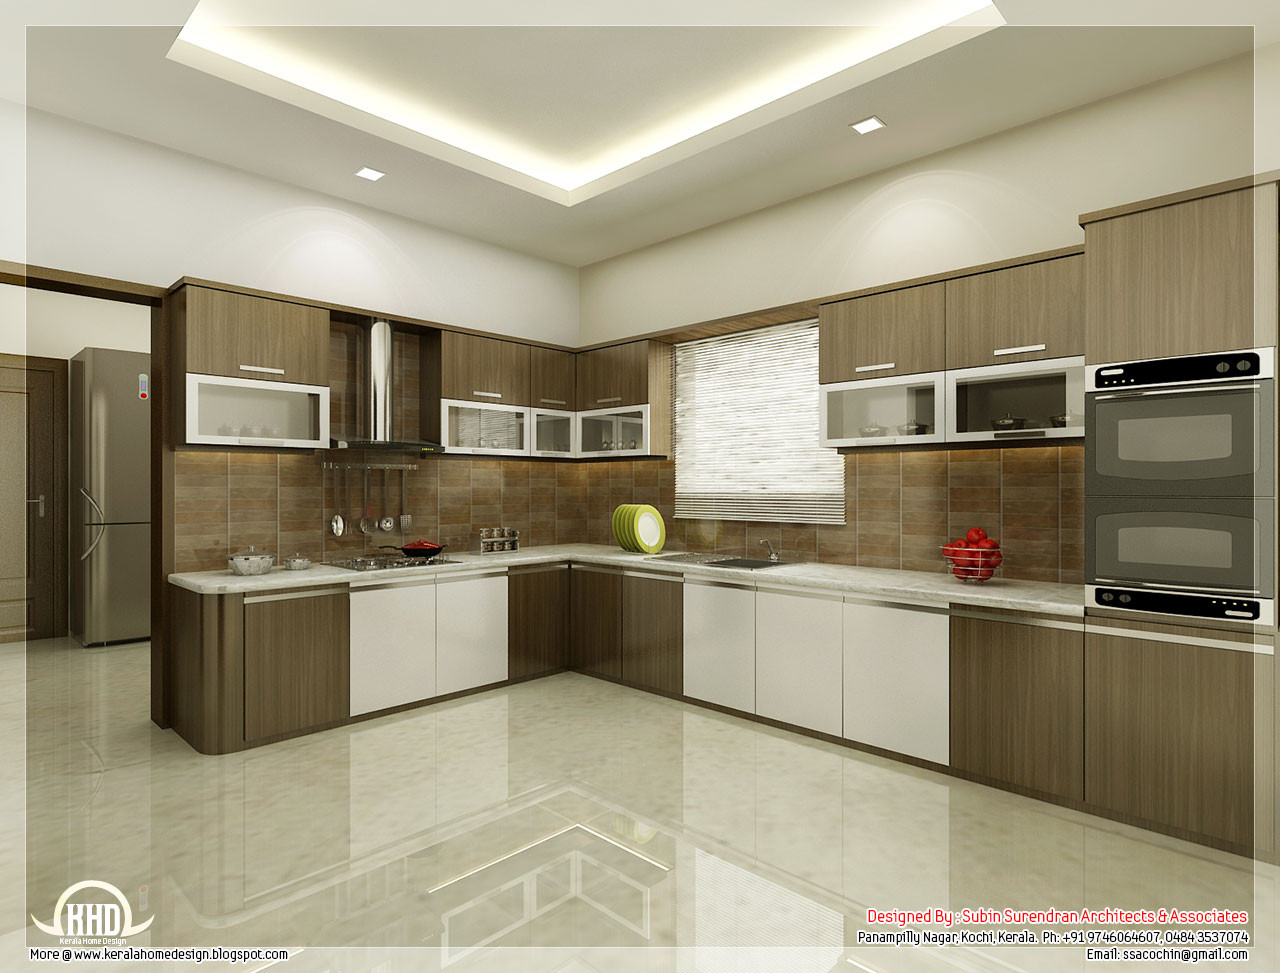 Interior Design Ideas Kitchen
 Kitchen and dining interiors Kerala home design and